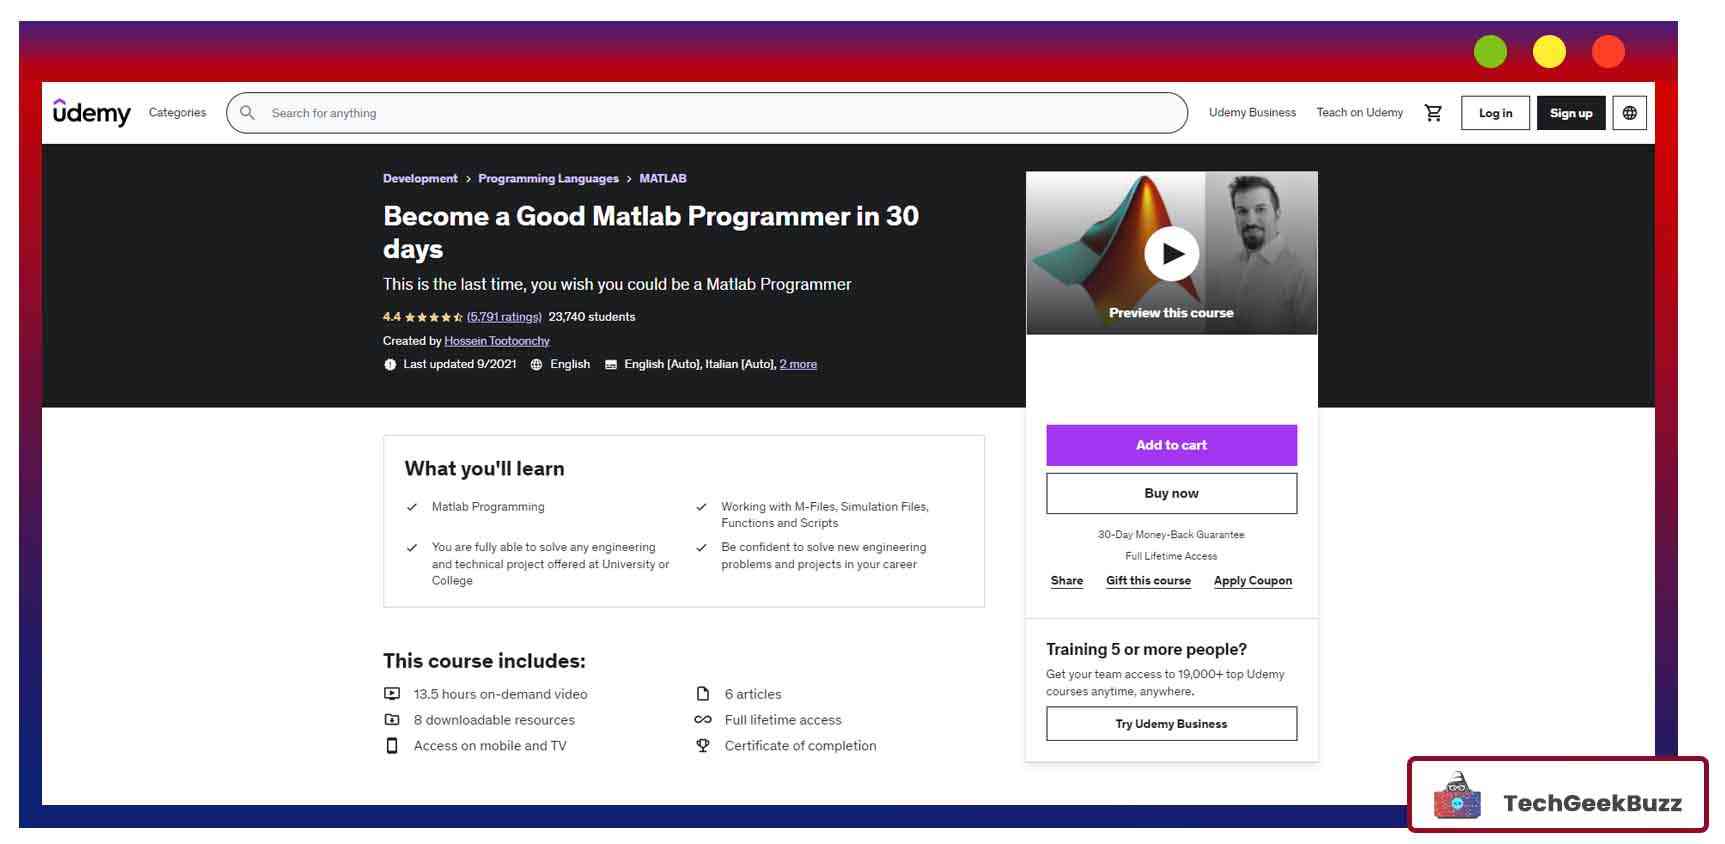 Become a Good Matlab Programmer in 30 days